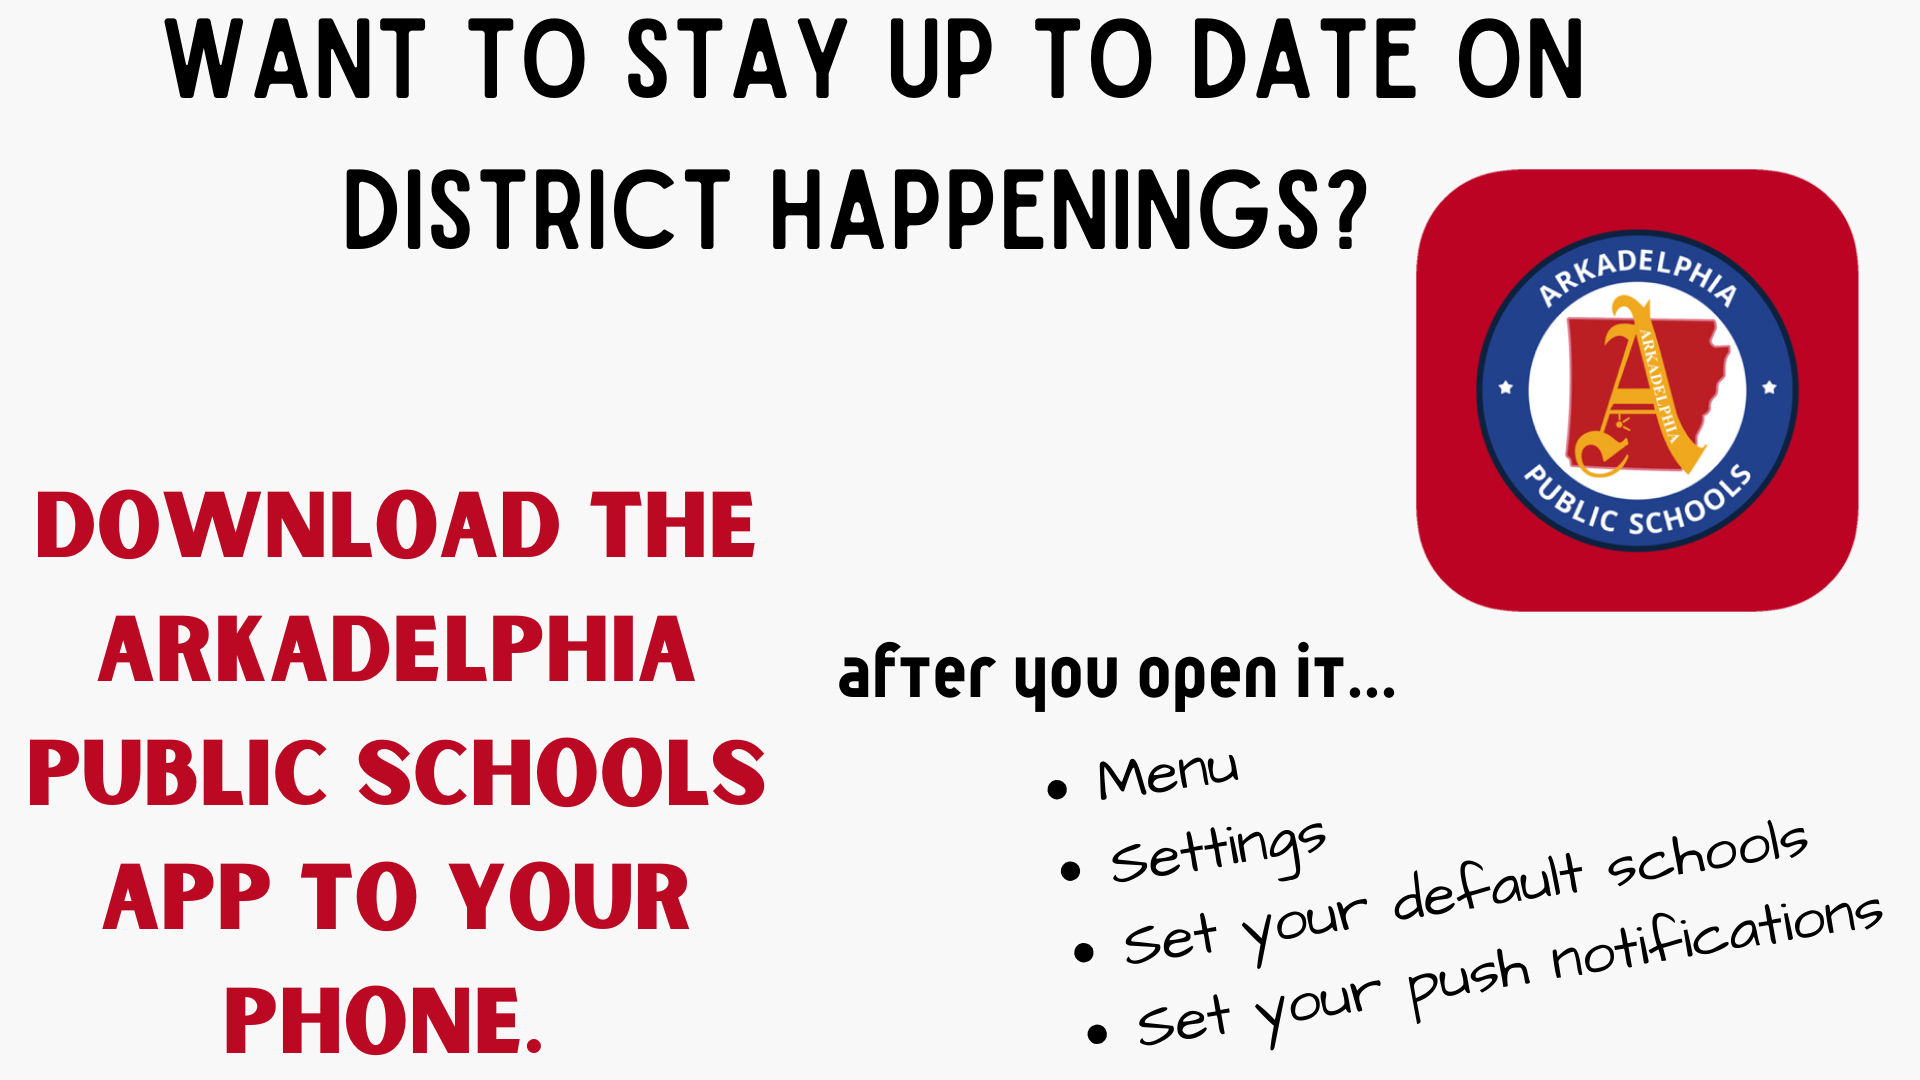 directions to downloading the apsd app